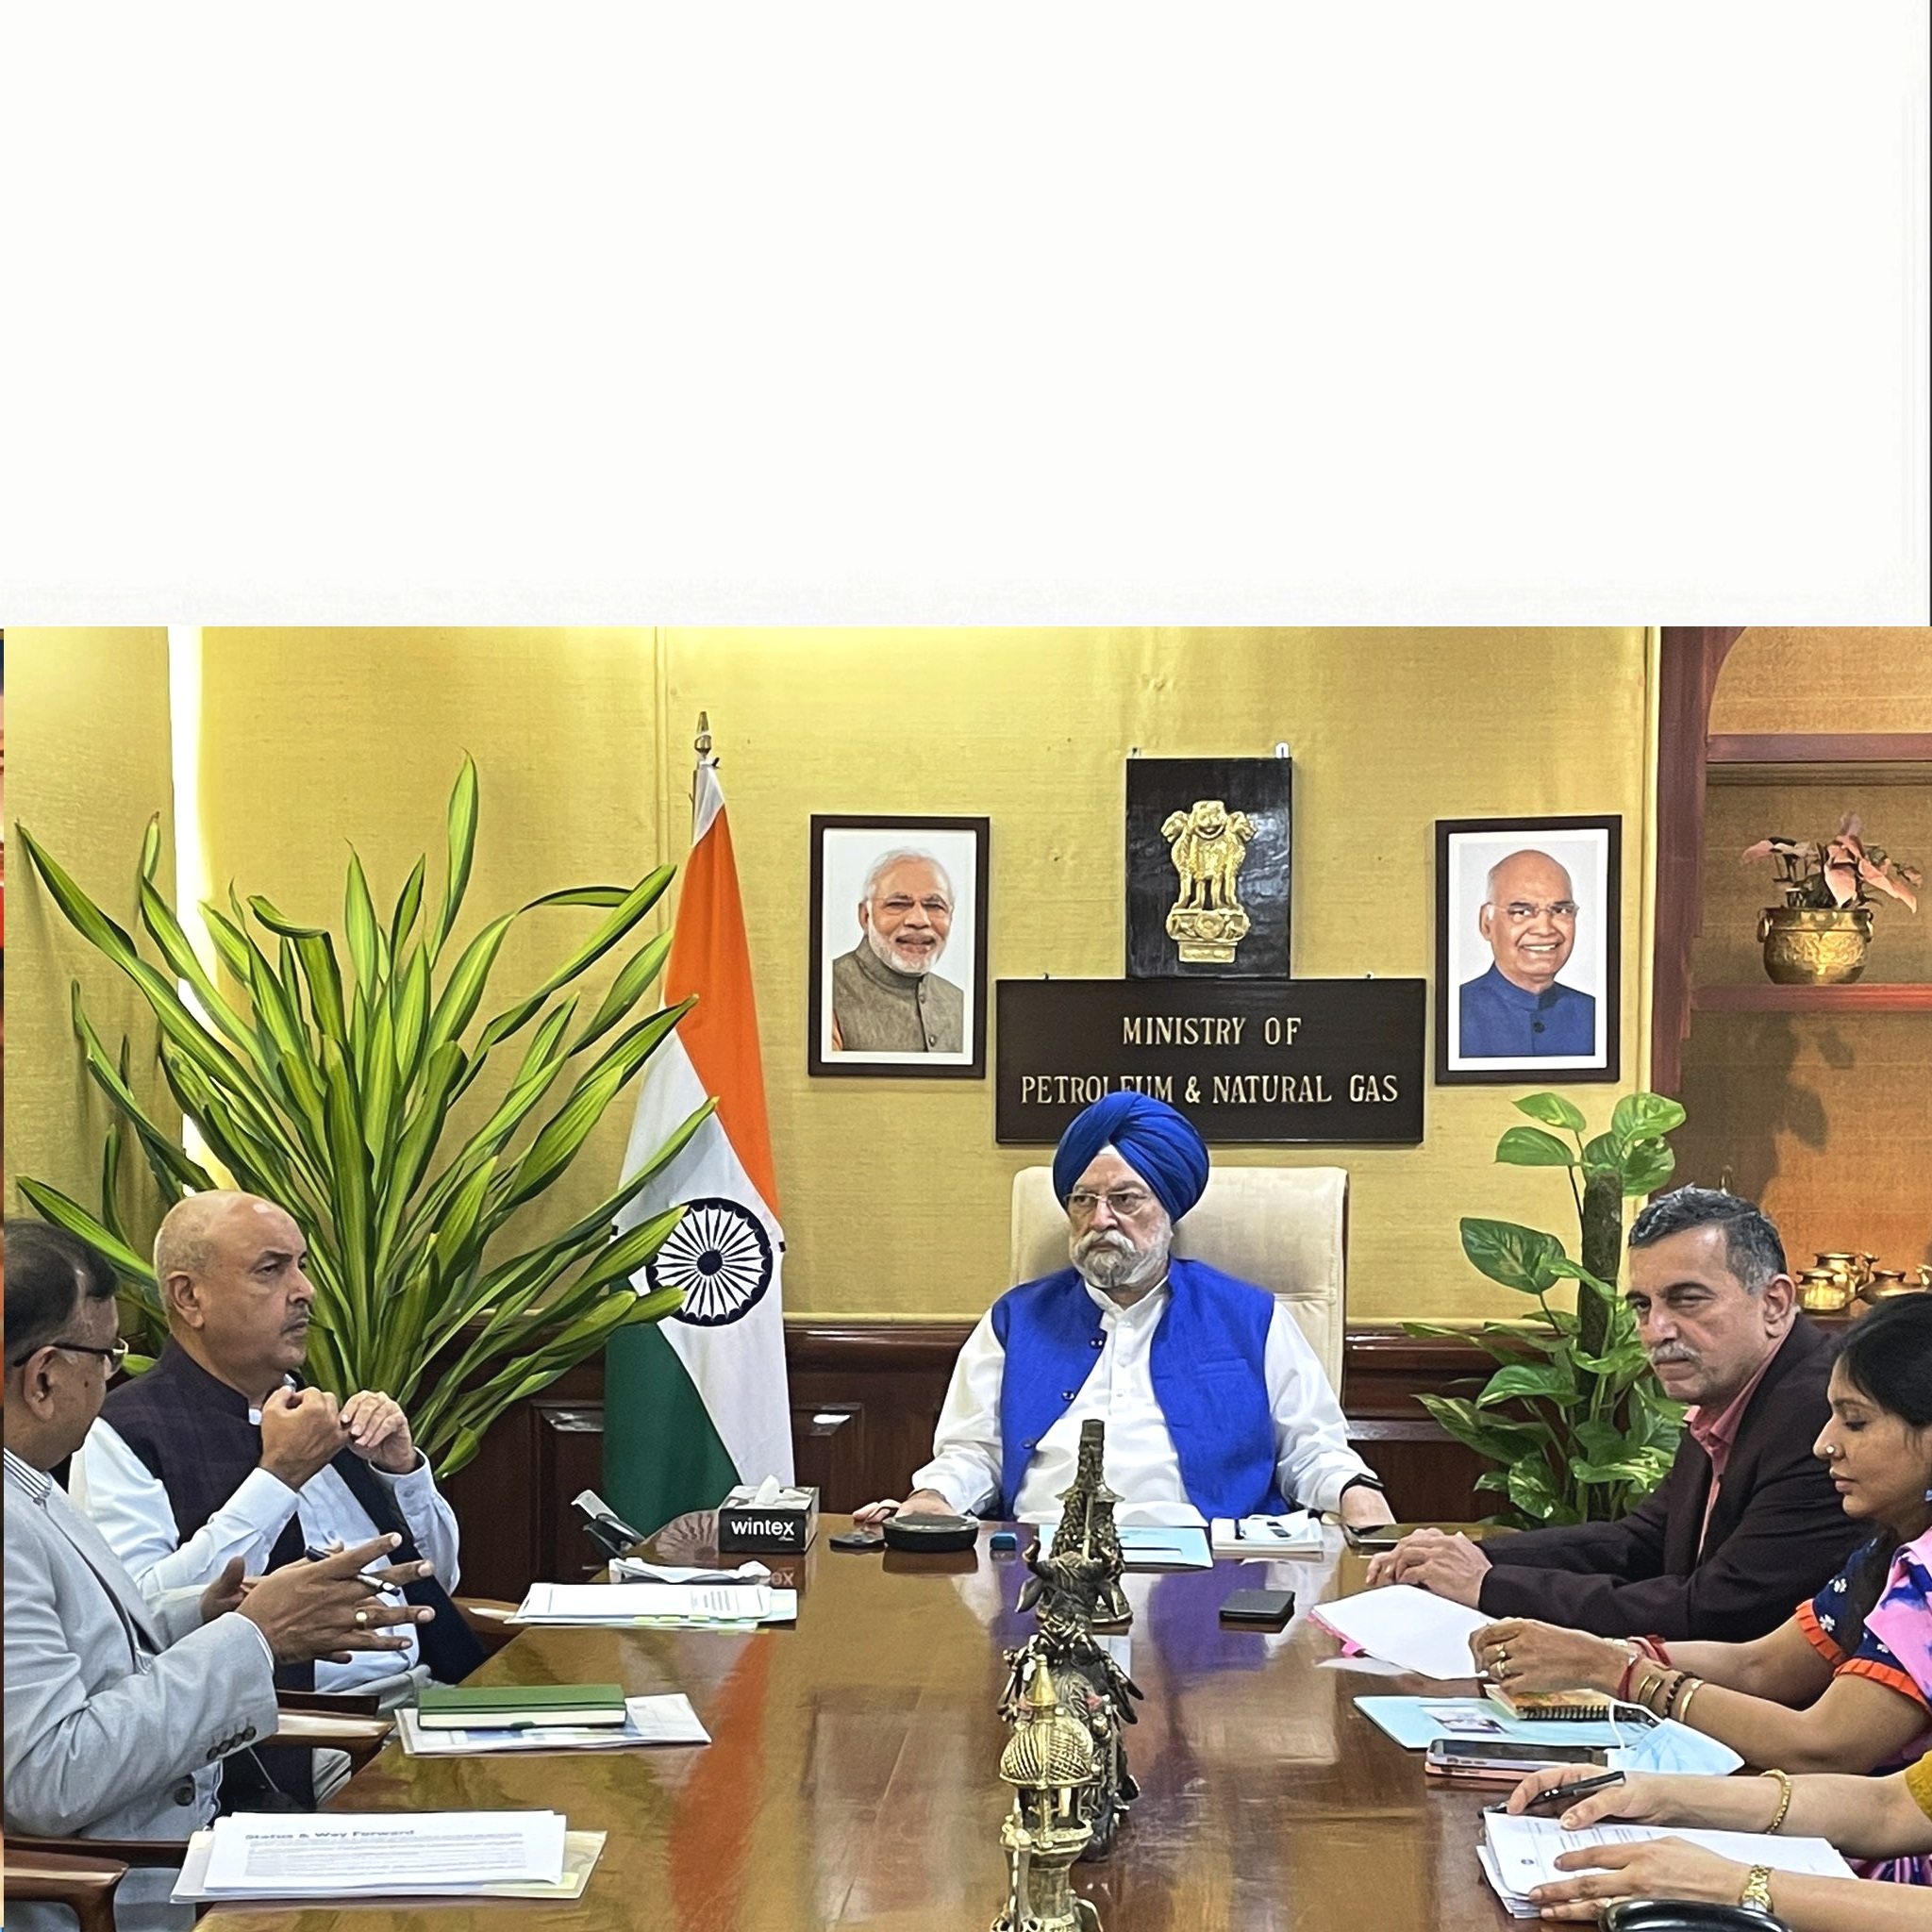 Min. MoPNG Shri Hardeep S Puri held a review meeting with senior officials  and PSU’s on prospective bilateral investments and steps to further strengthen the energy cooperation between India & Russia.